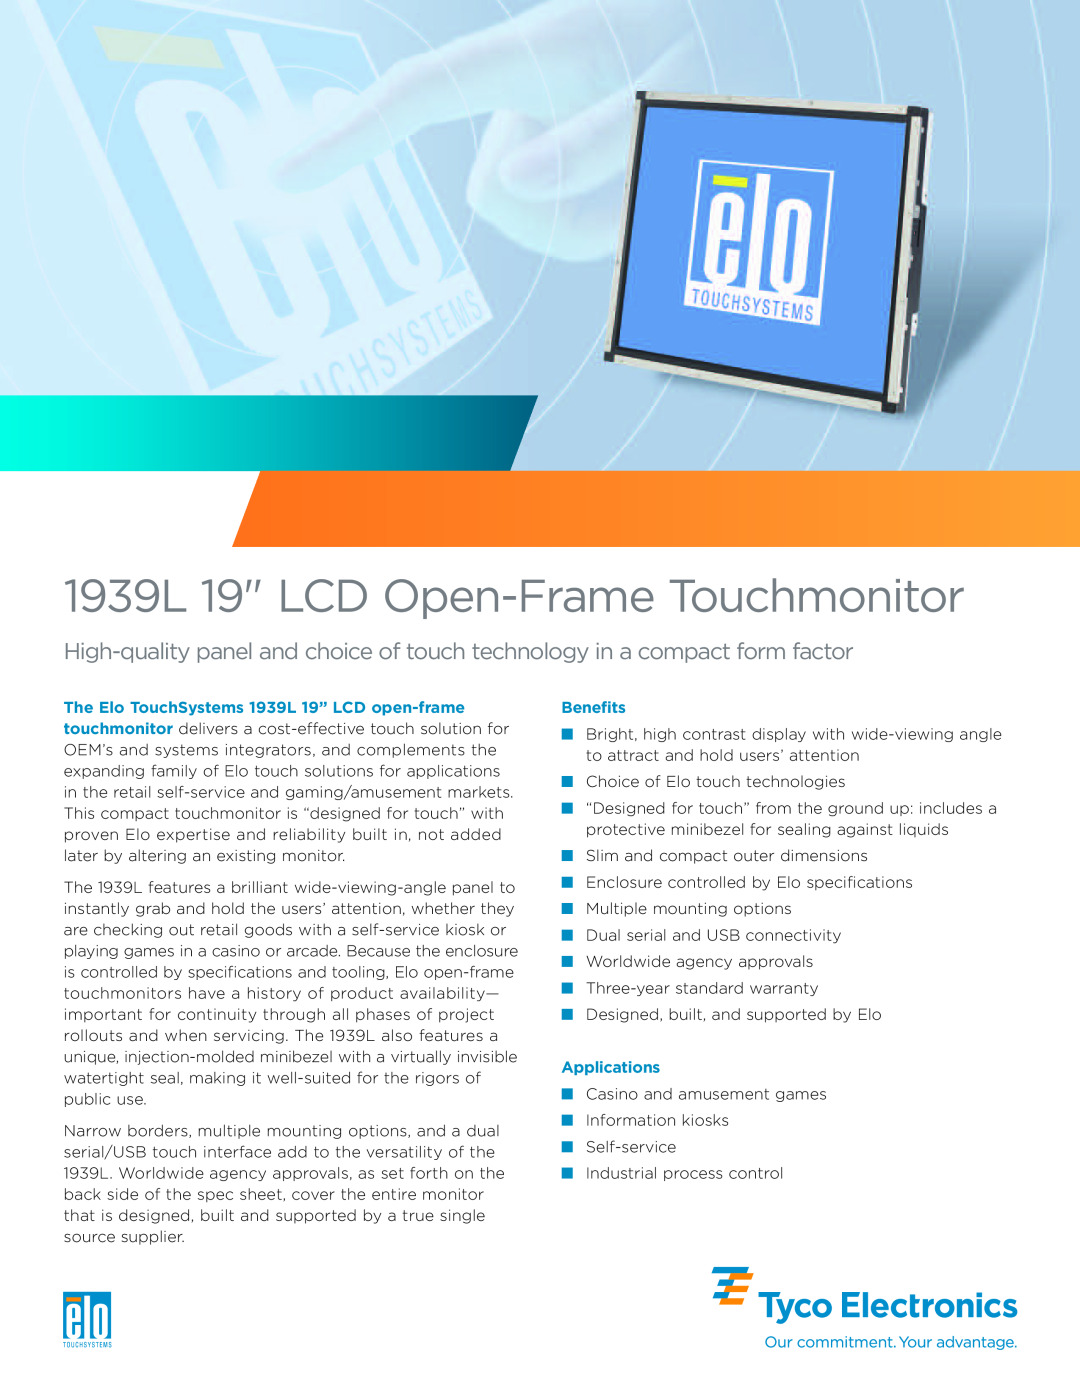 Elo TouchSystems manual Touchmonitor User Guide, 1939L 19” LCD Rear-Mount Touchmonitor 